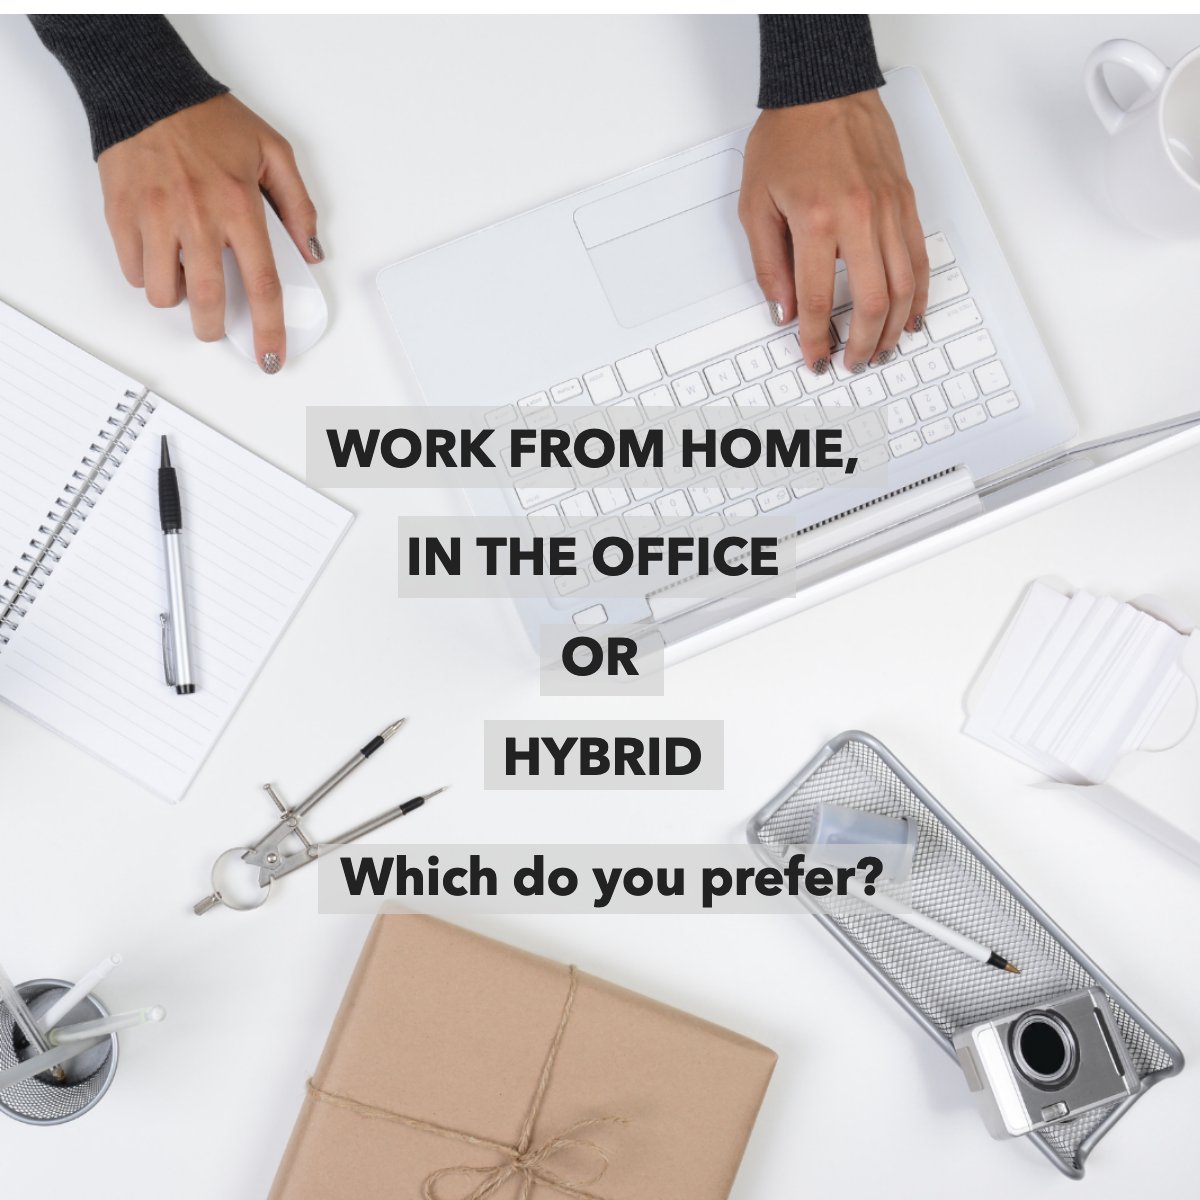 Do you have a dedicated working space? 💻
 
Tell us in the comments! 💭 

#question #workspace #worklife #homeoffice #hybridwork
 #TroySage #Realtor #HomesForSale #RealEstate #RealEstateMarket #realestateinsider #RealEstateMarket